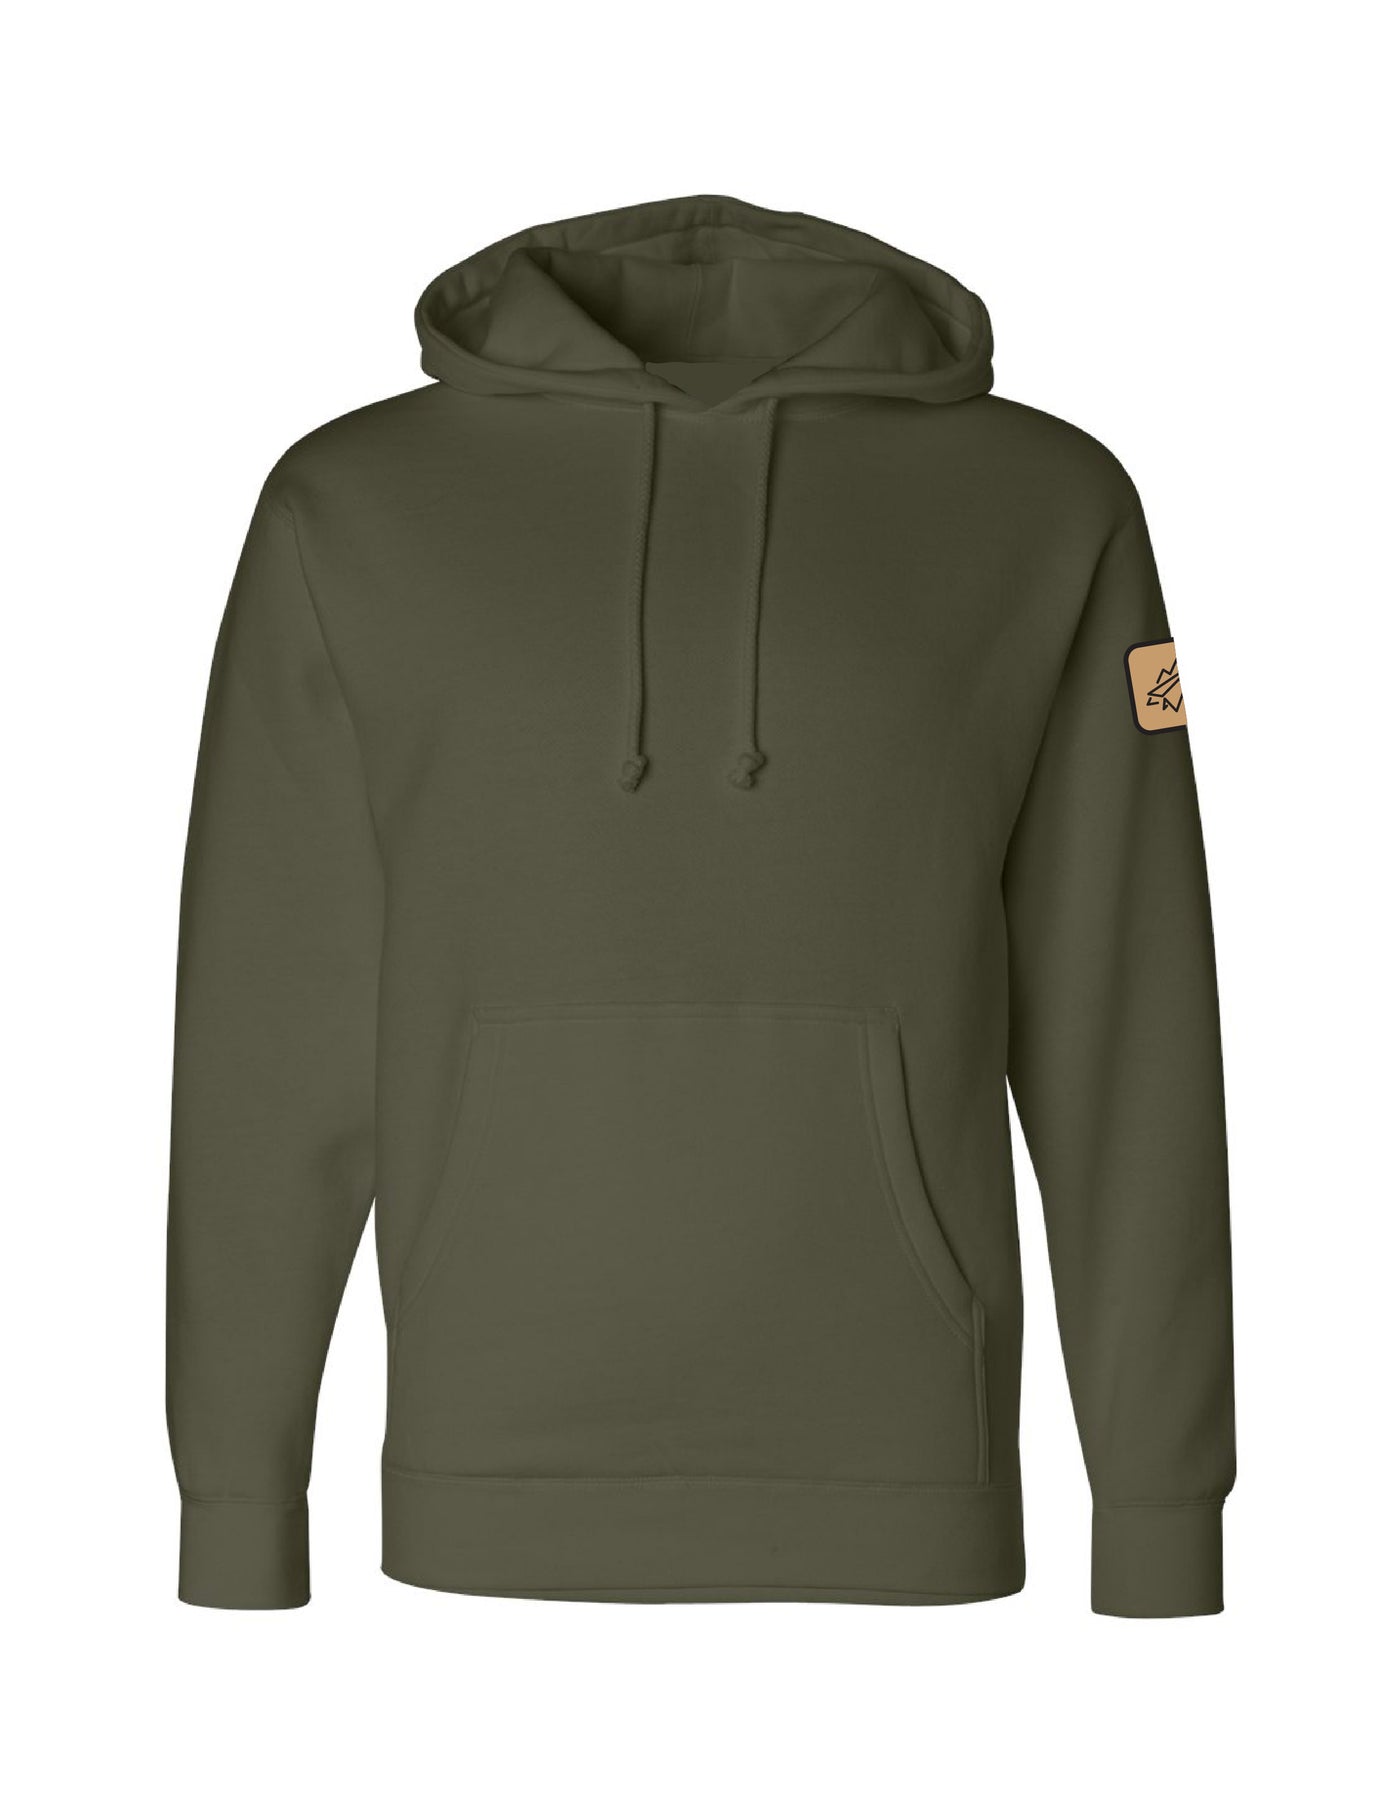 Patch Hoodie - Army